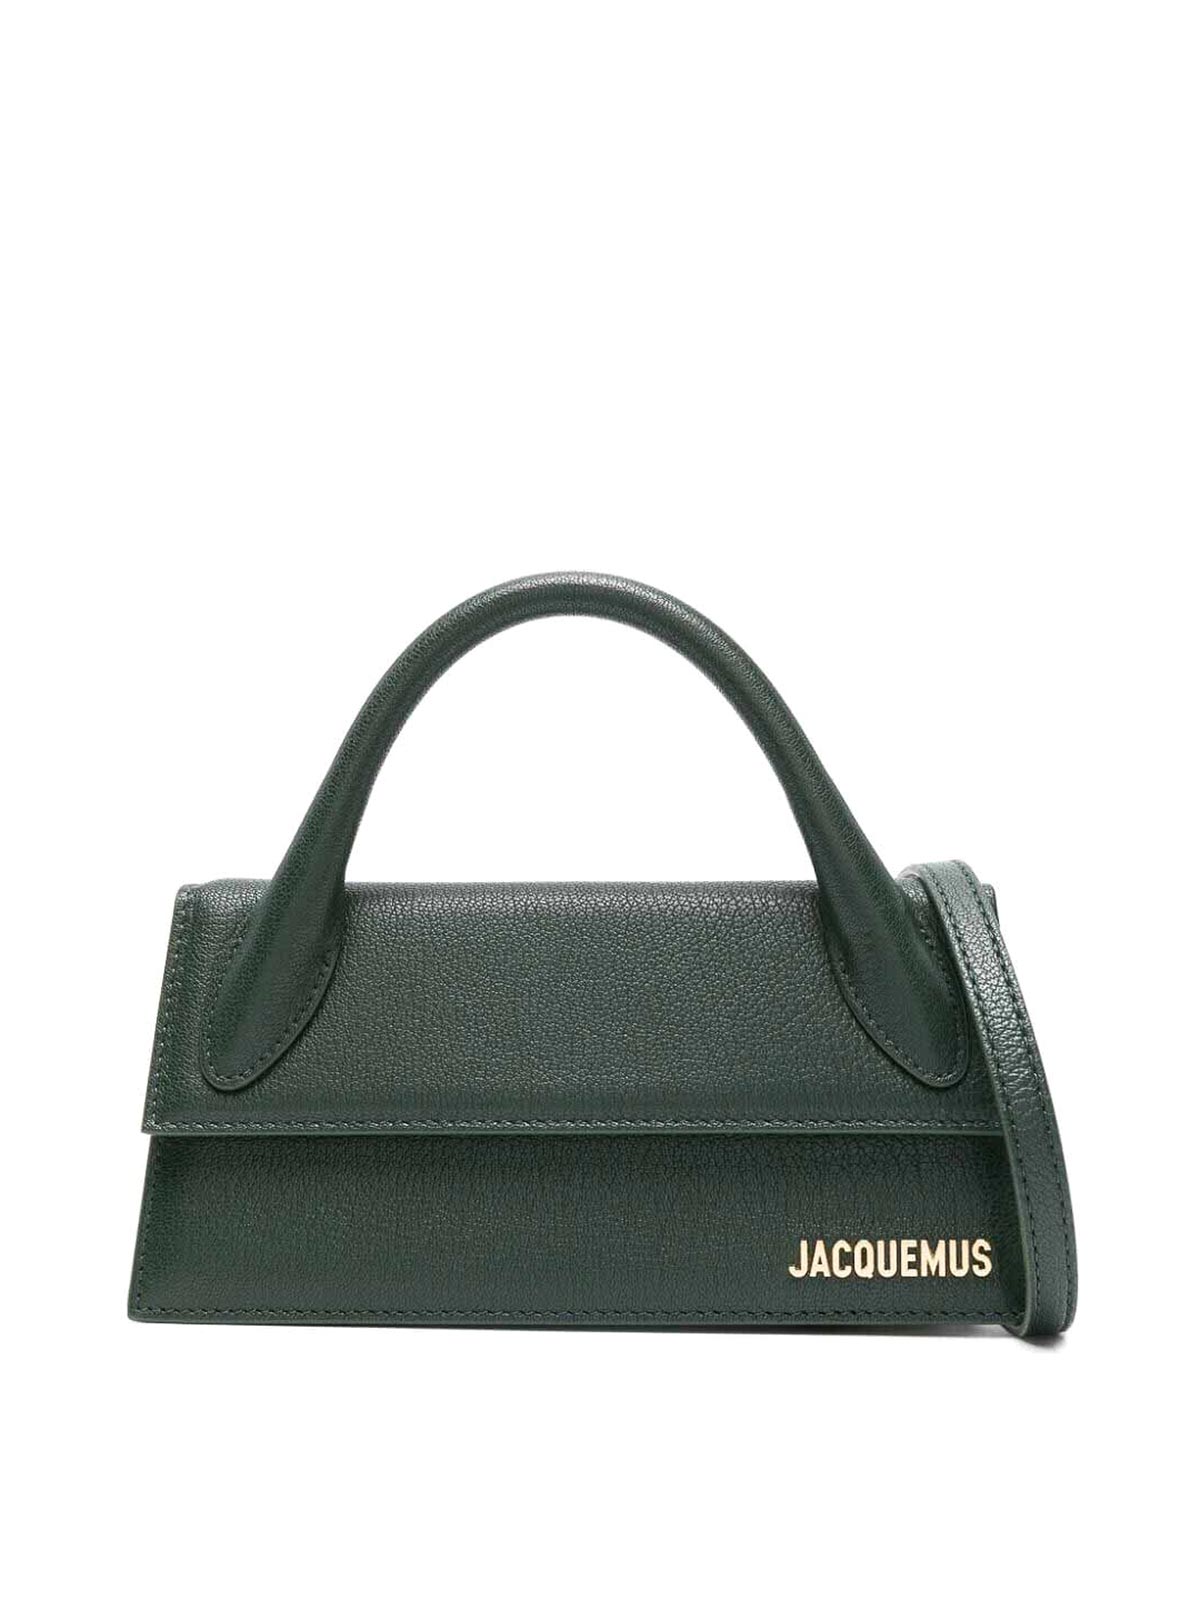 Jacquemus Le Chiquito Long Bag In Green